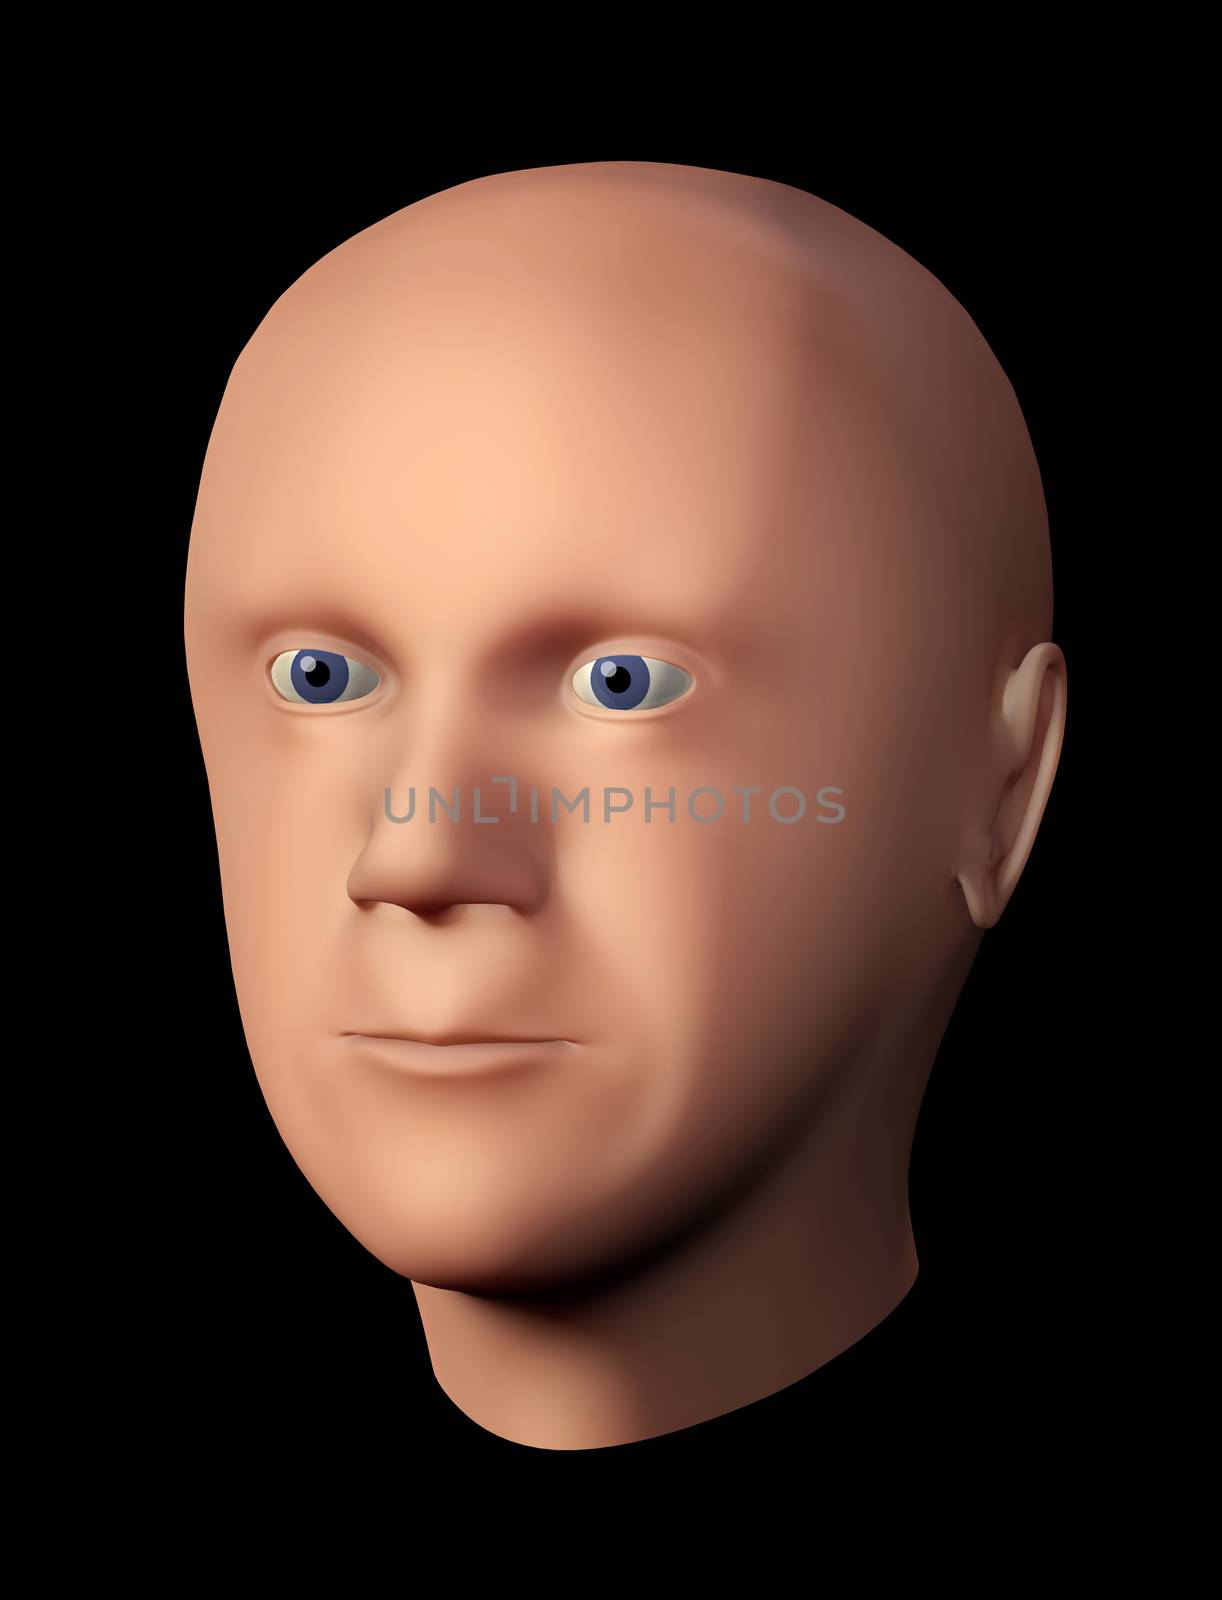 3D rendering of a male head without hair against black background